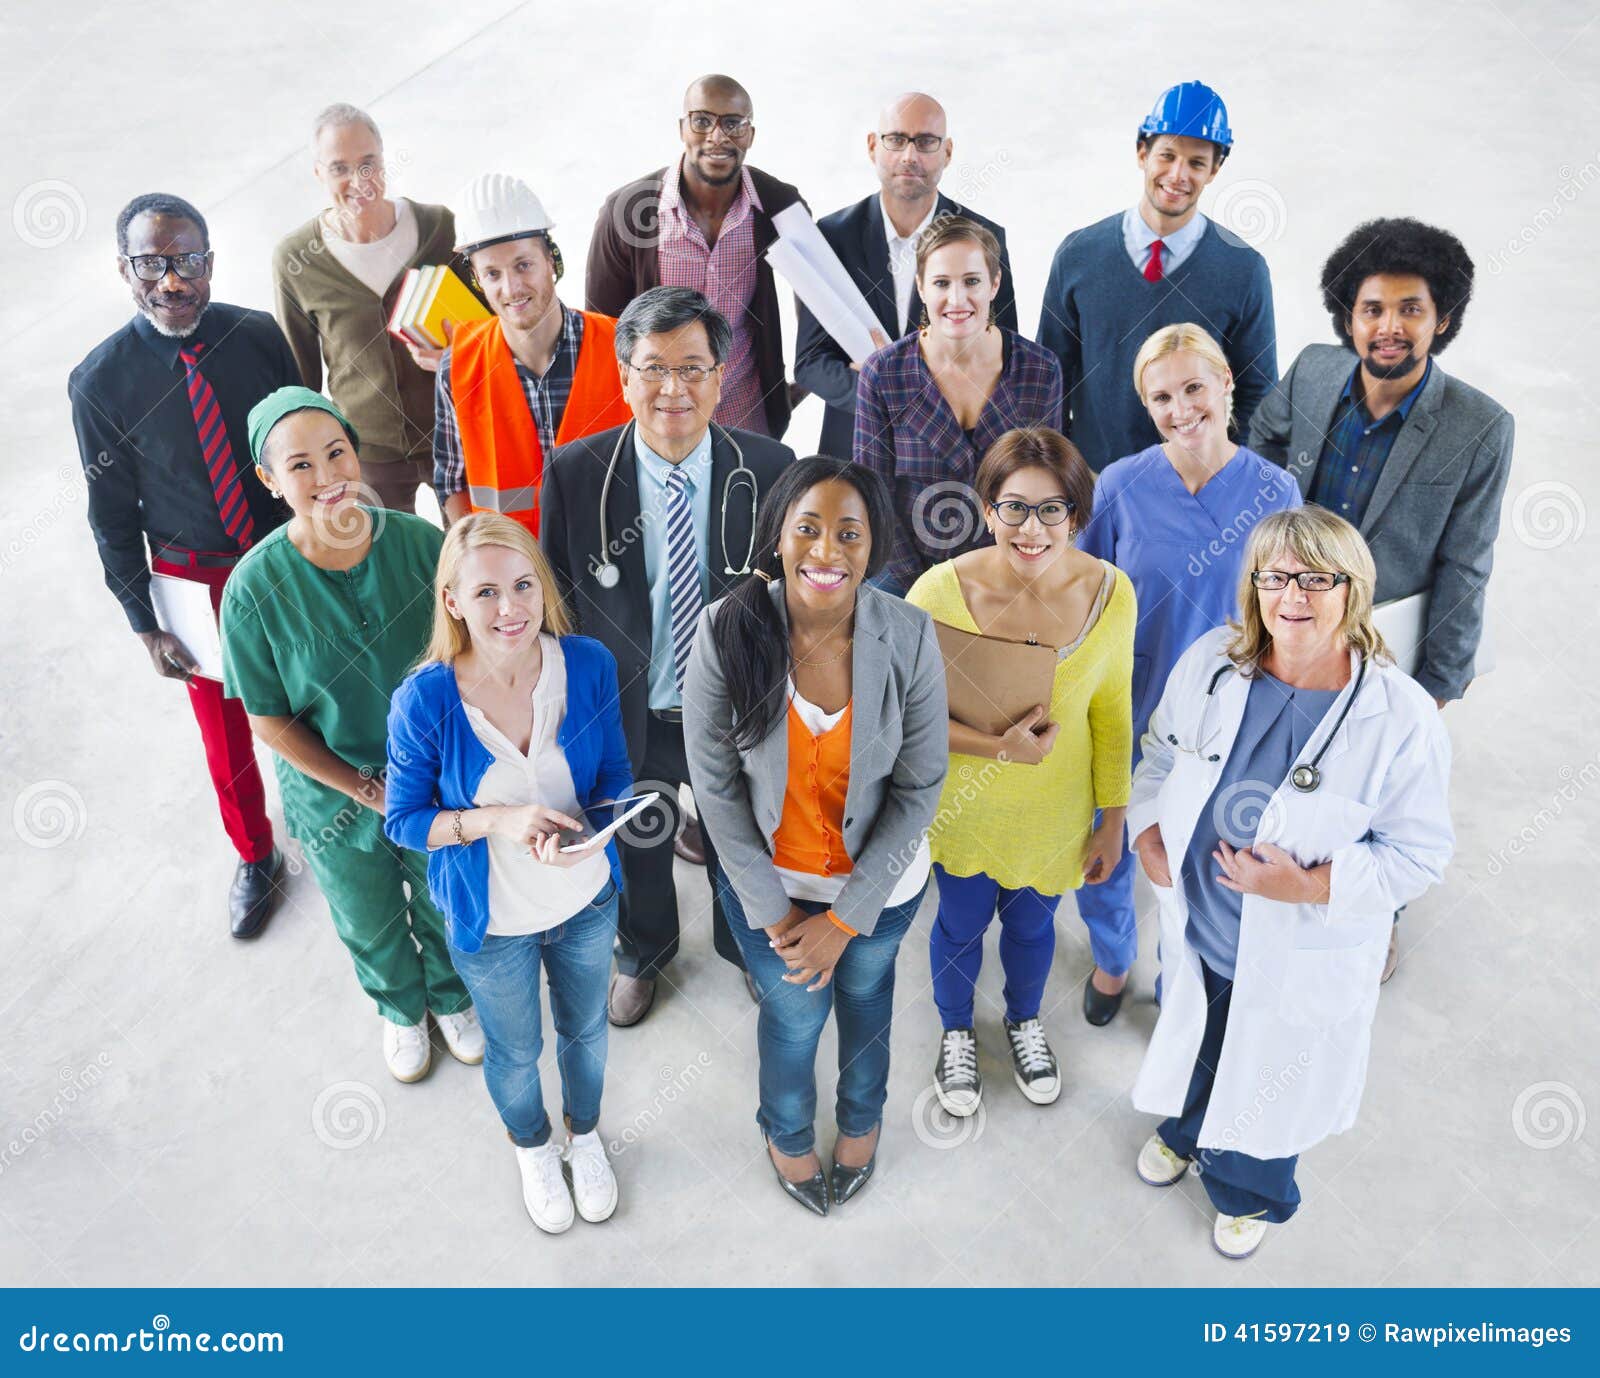 group of diverse multiethnic people with various jobs